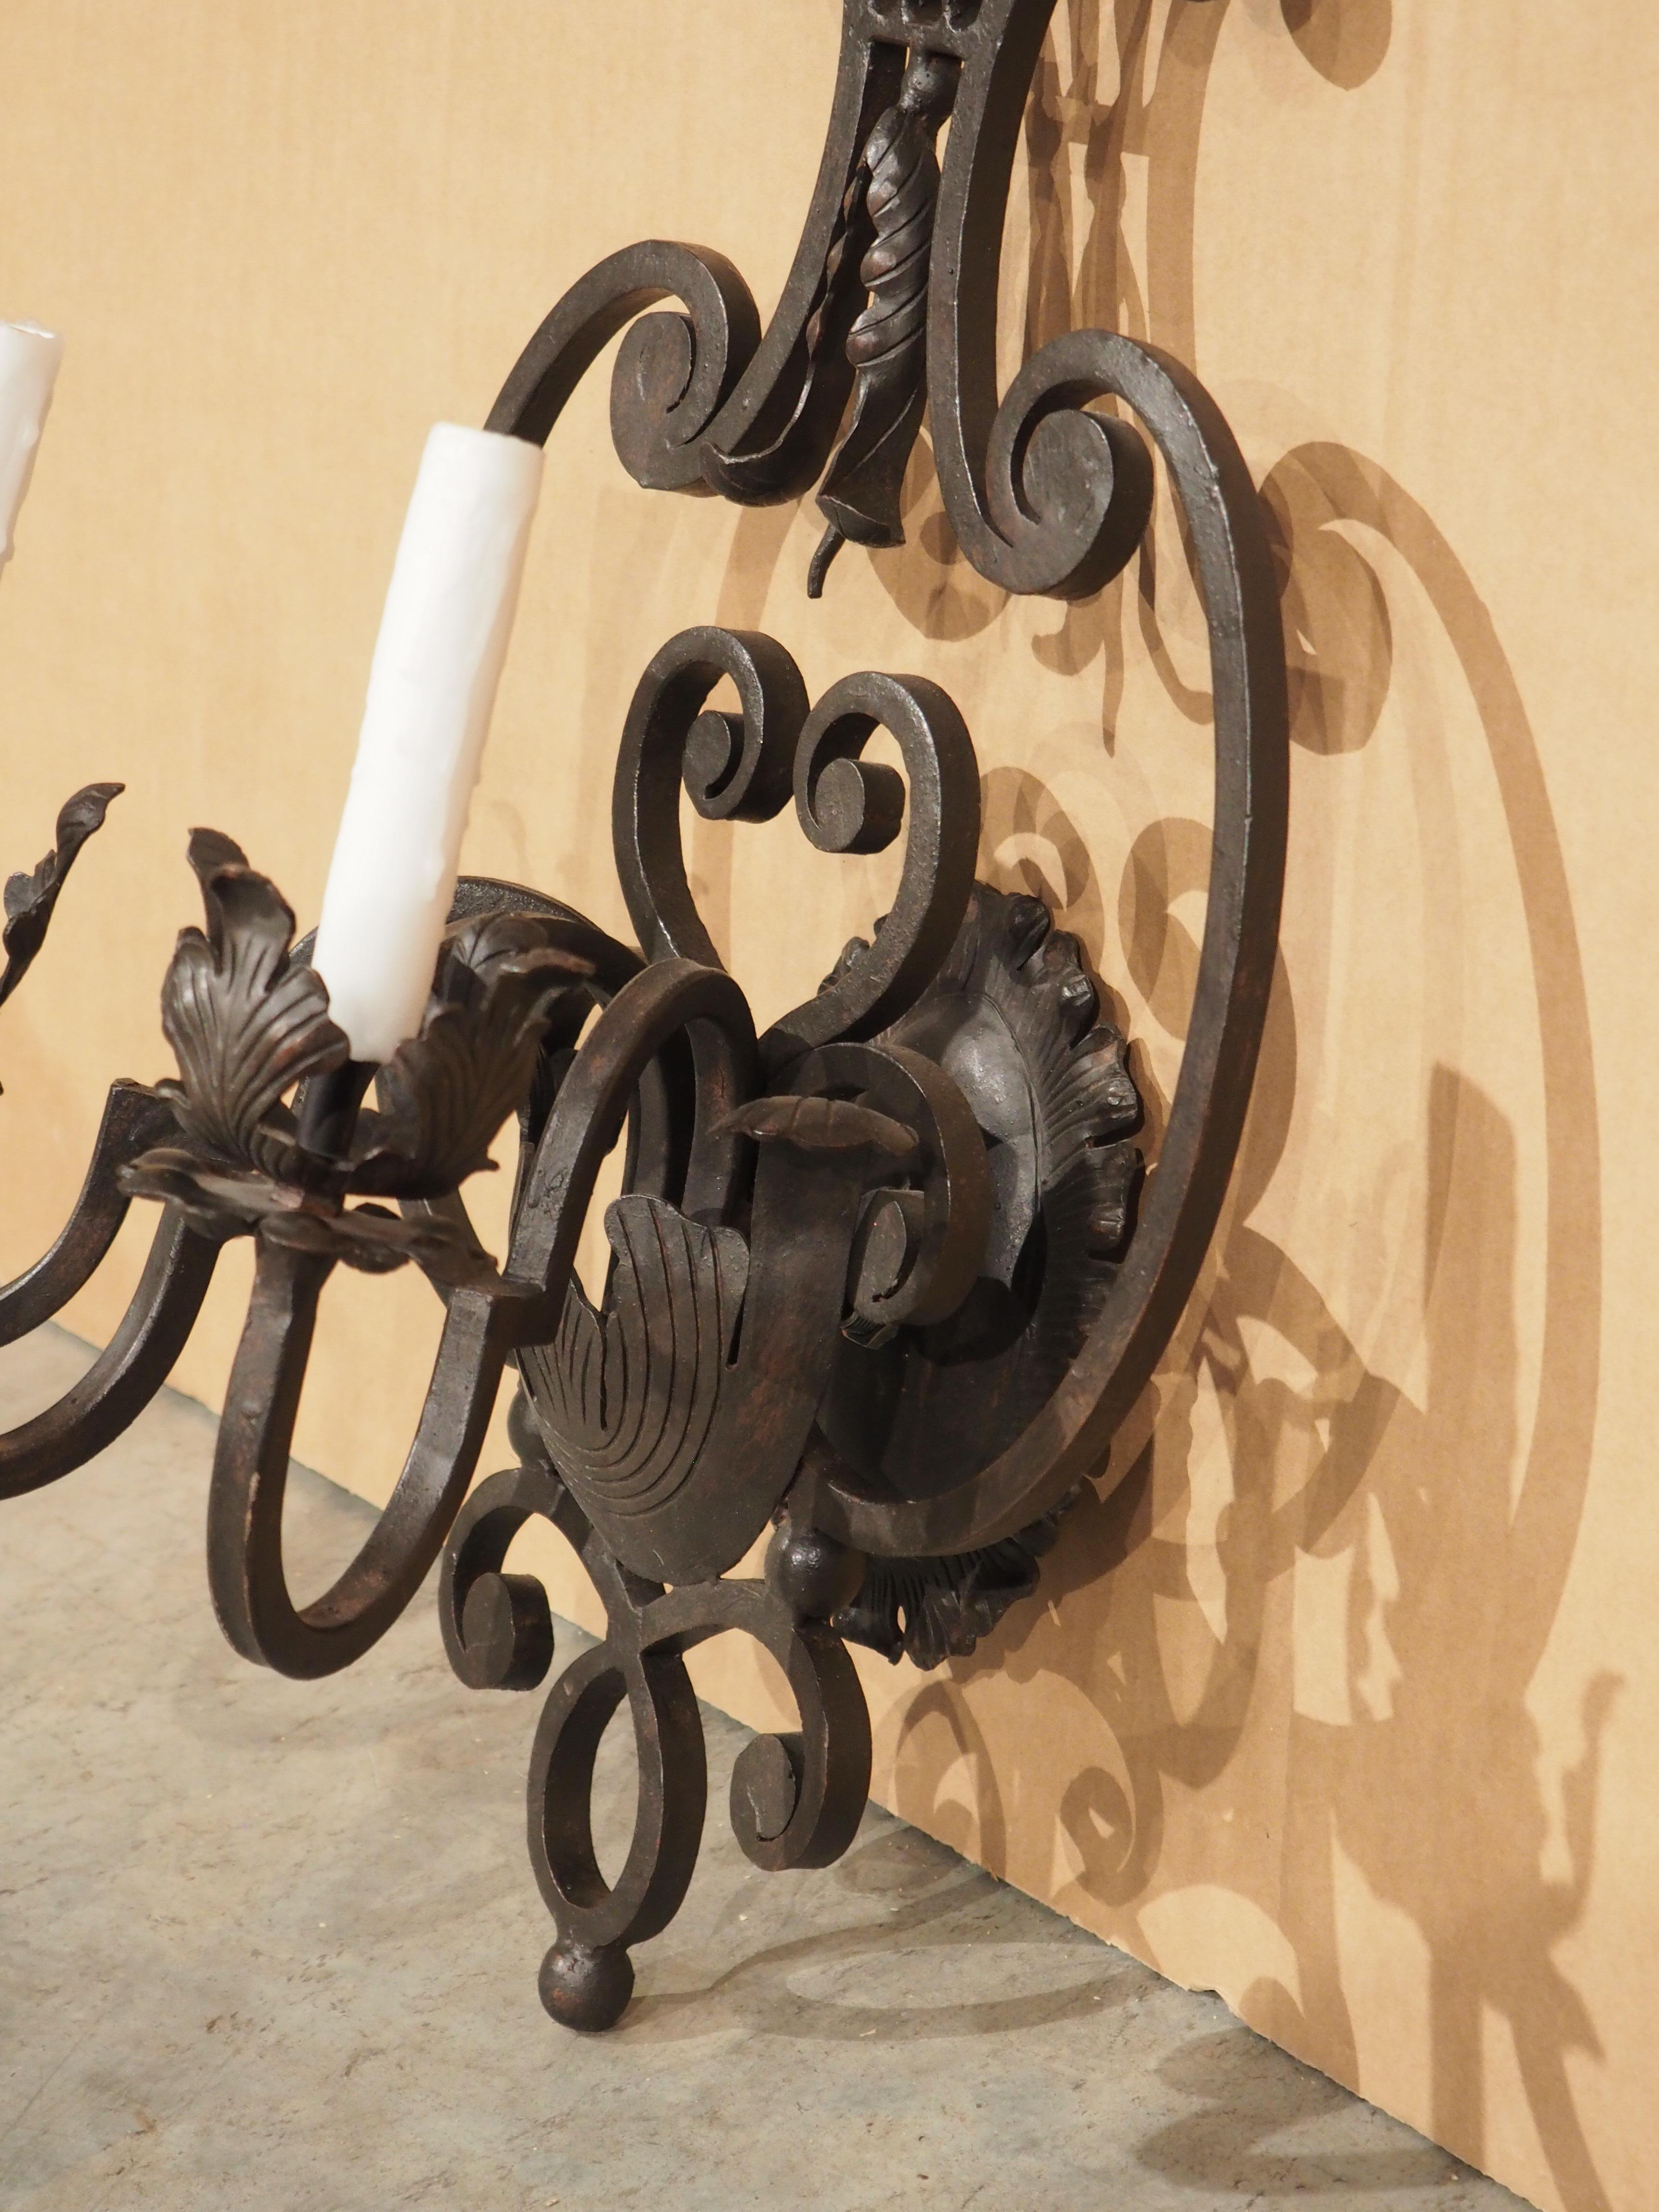 A functional and beautiful three-light wall sconce, wrought by hand to resemble antique Spanish lighting. The three sinuous arms with angular transitions emerge from a leaf cup above a parted backplate. A series of scrolls and a nyctinastic leaf